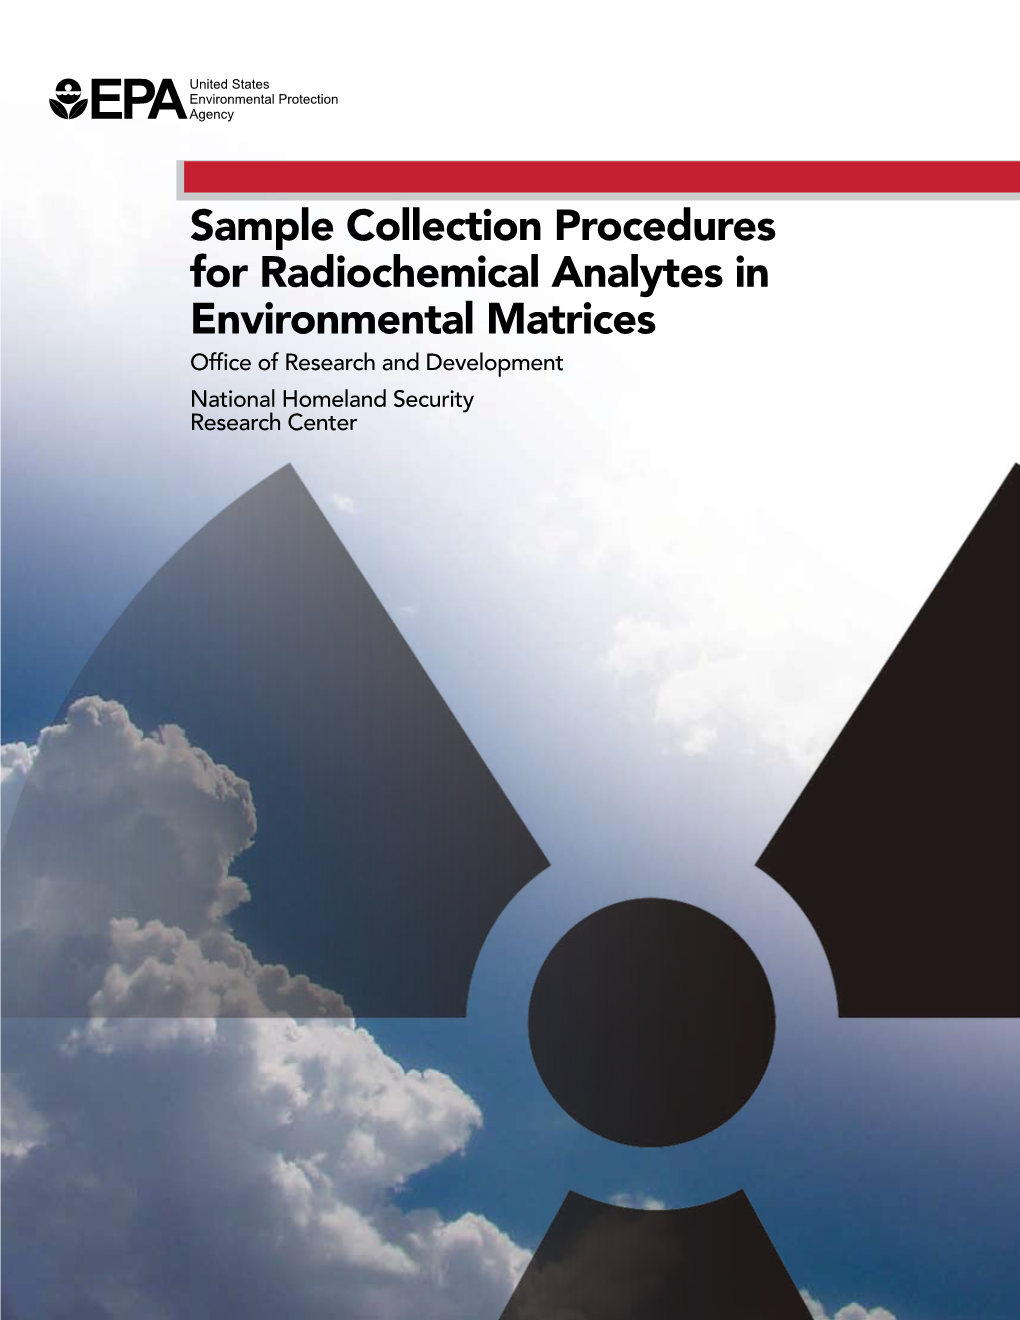 Sample Collection Procedures for Radiochemical Analytes in Environmental Matrices Office of Research and Development National Homeland Security Research Center